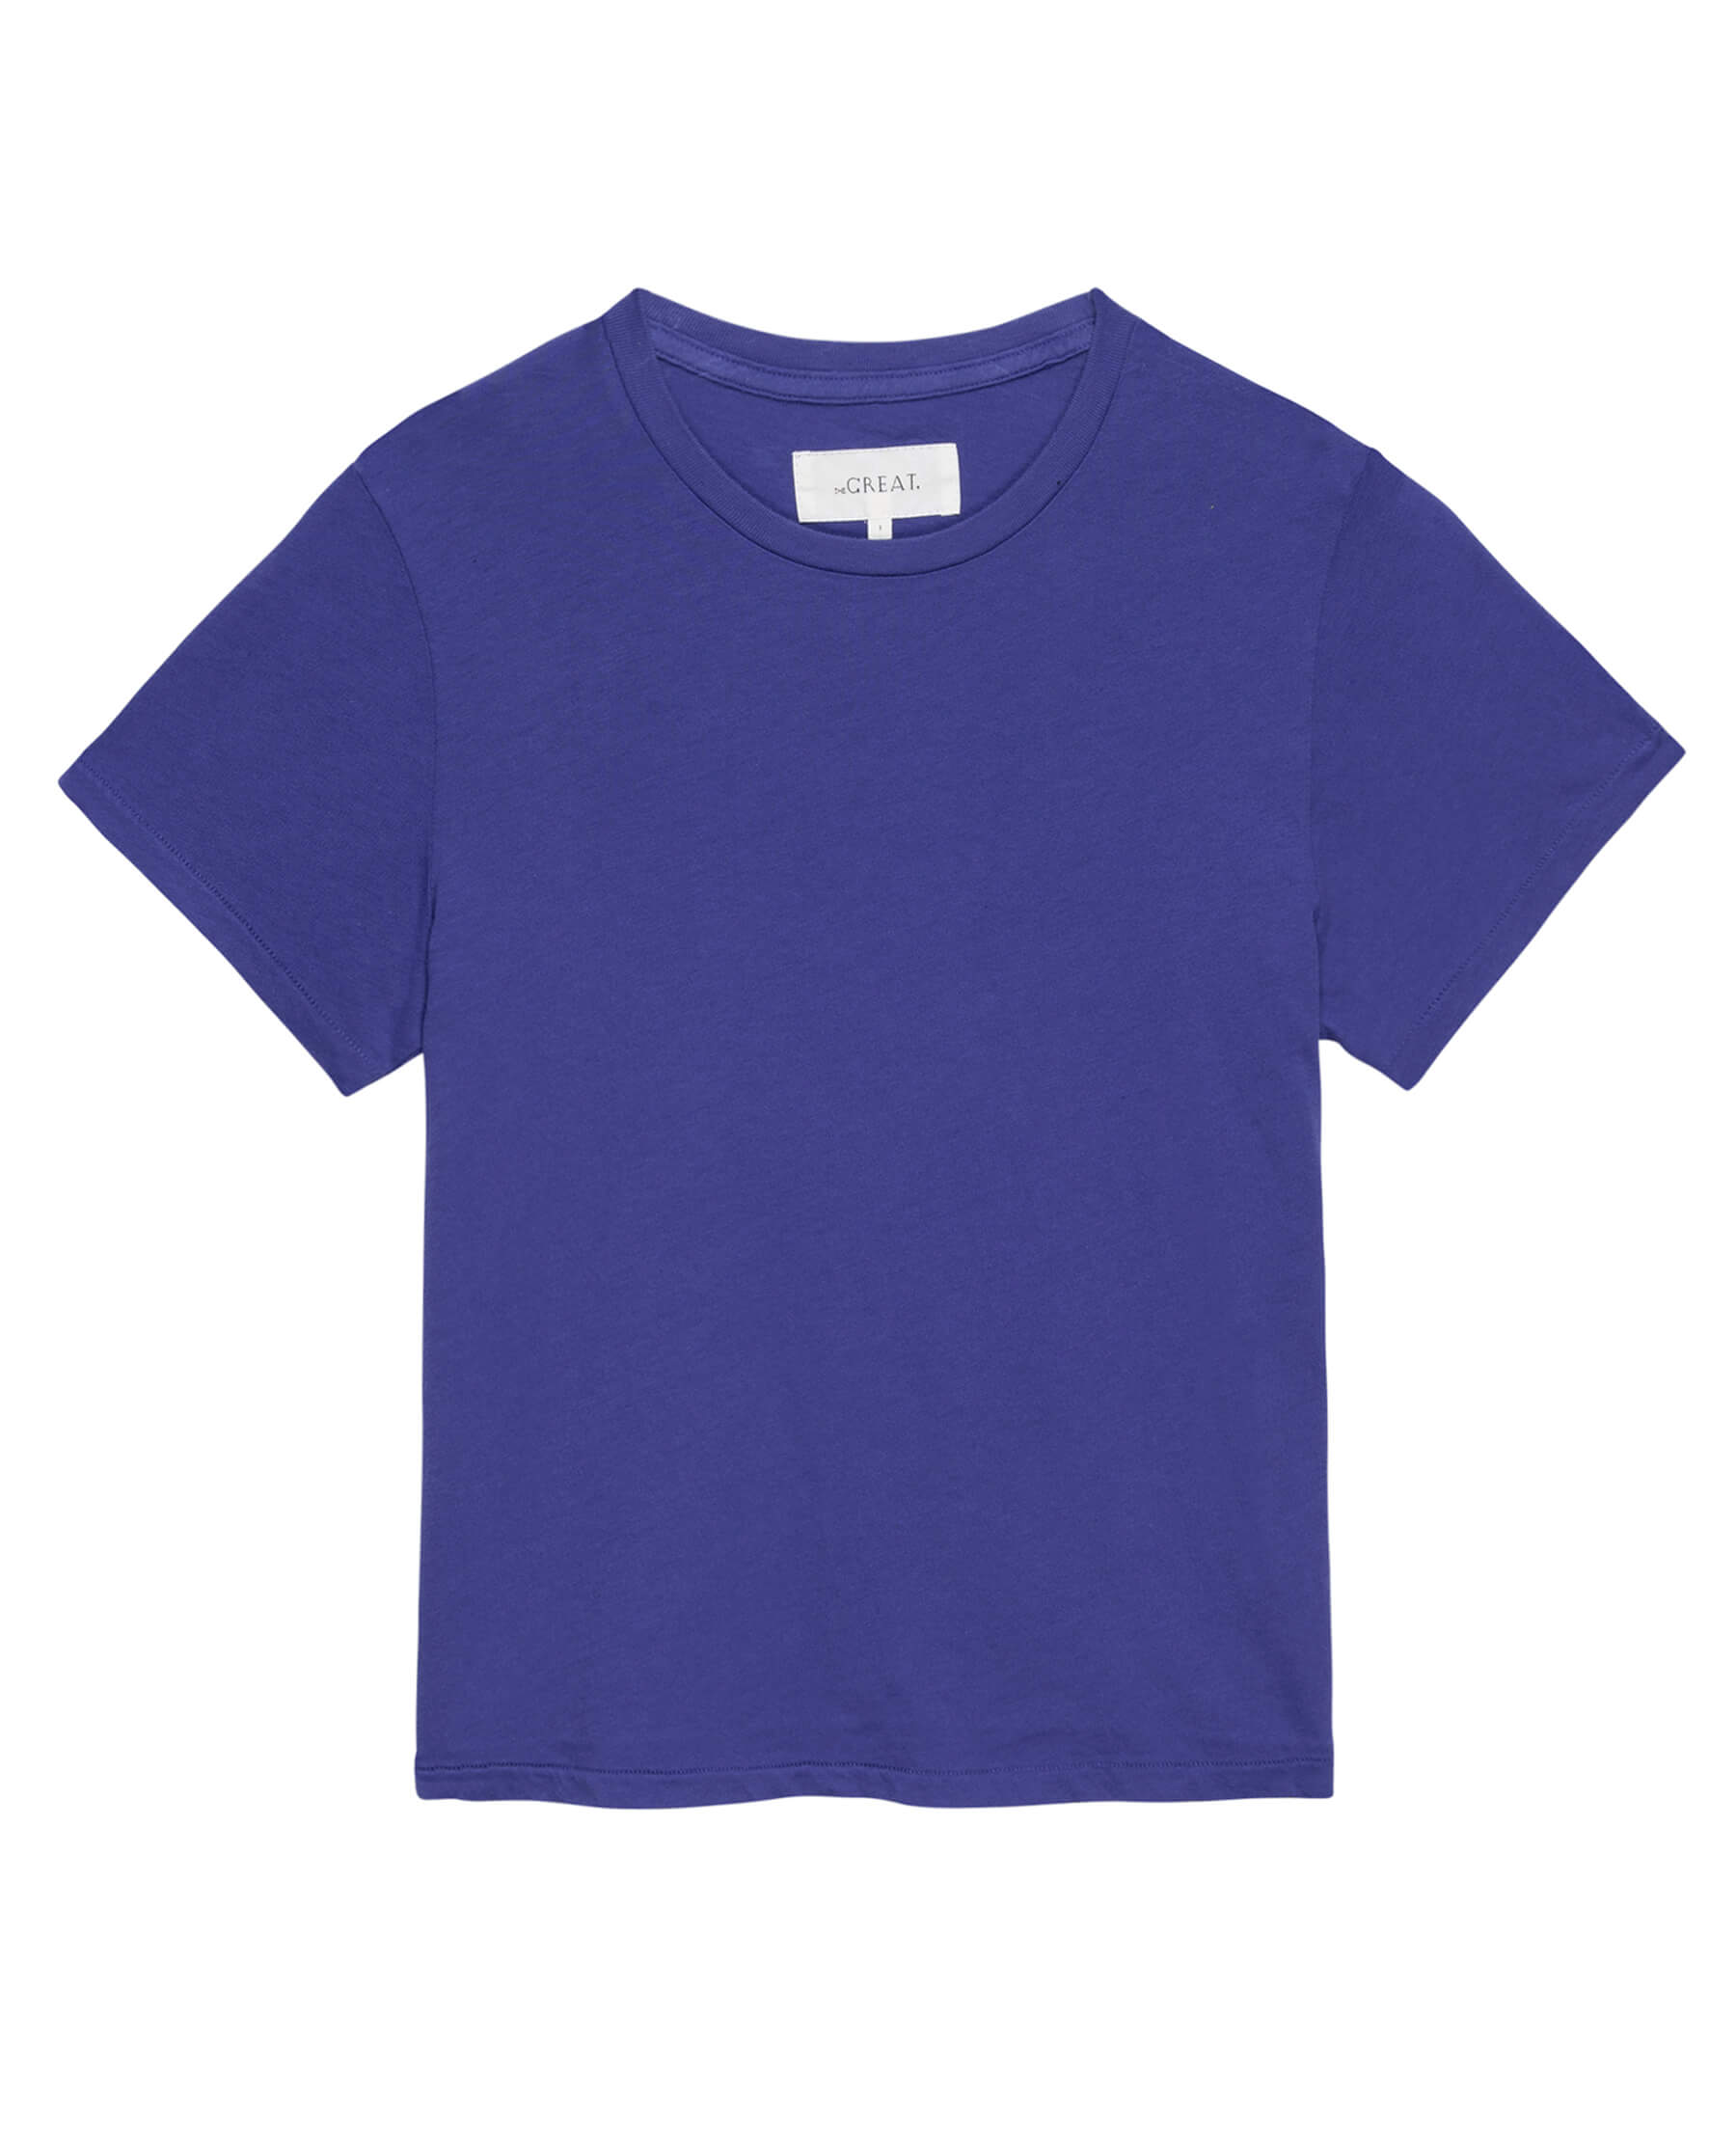 The Little Tee. Solid -- Cambridge Blue